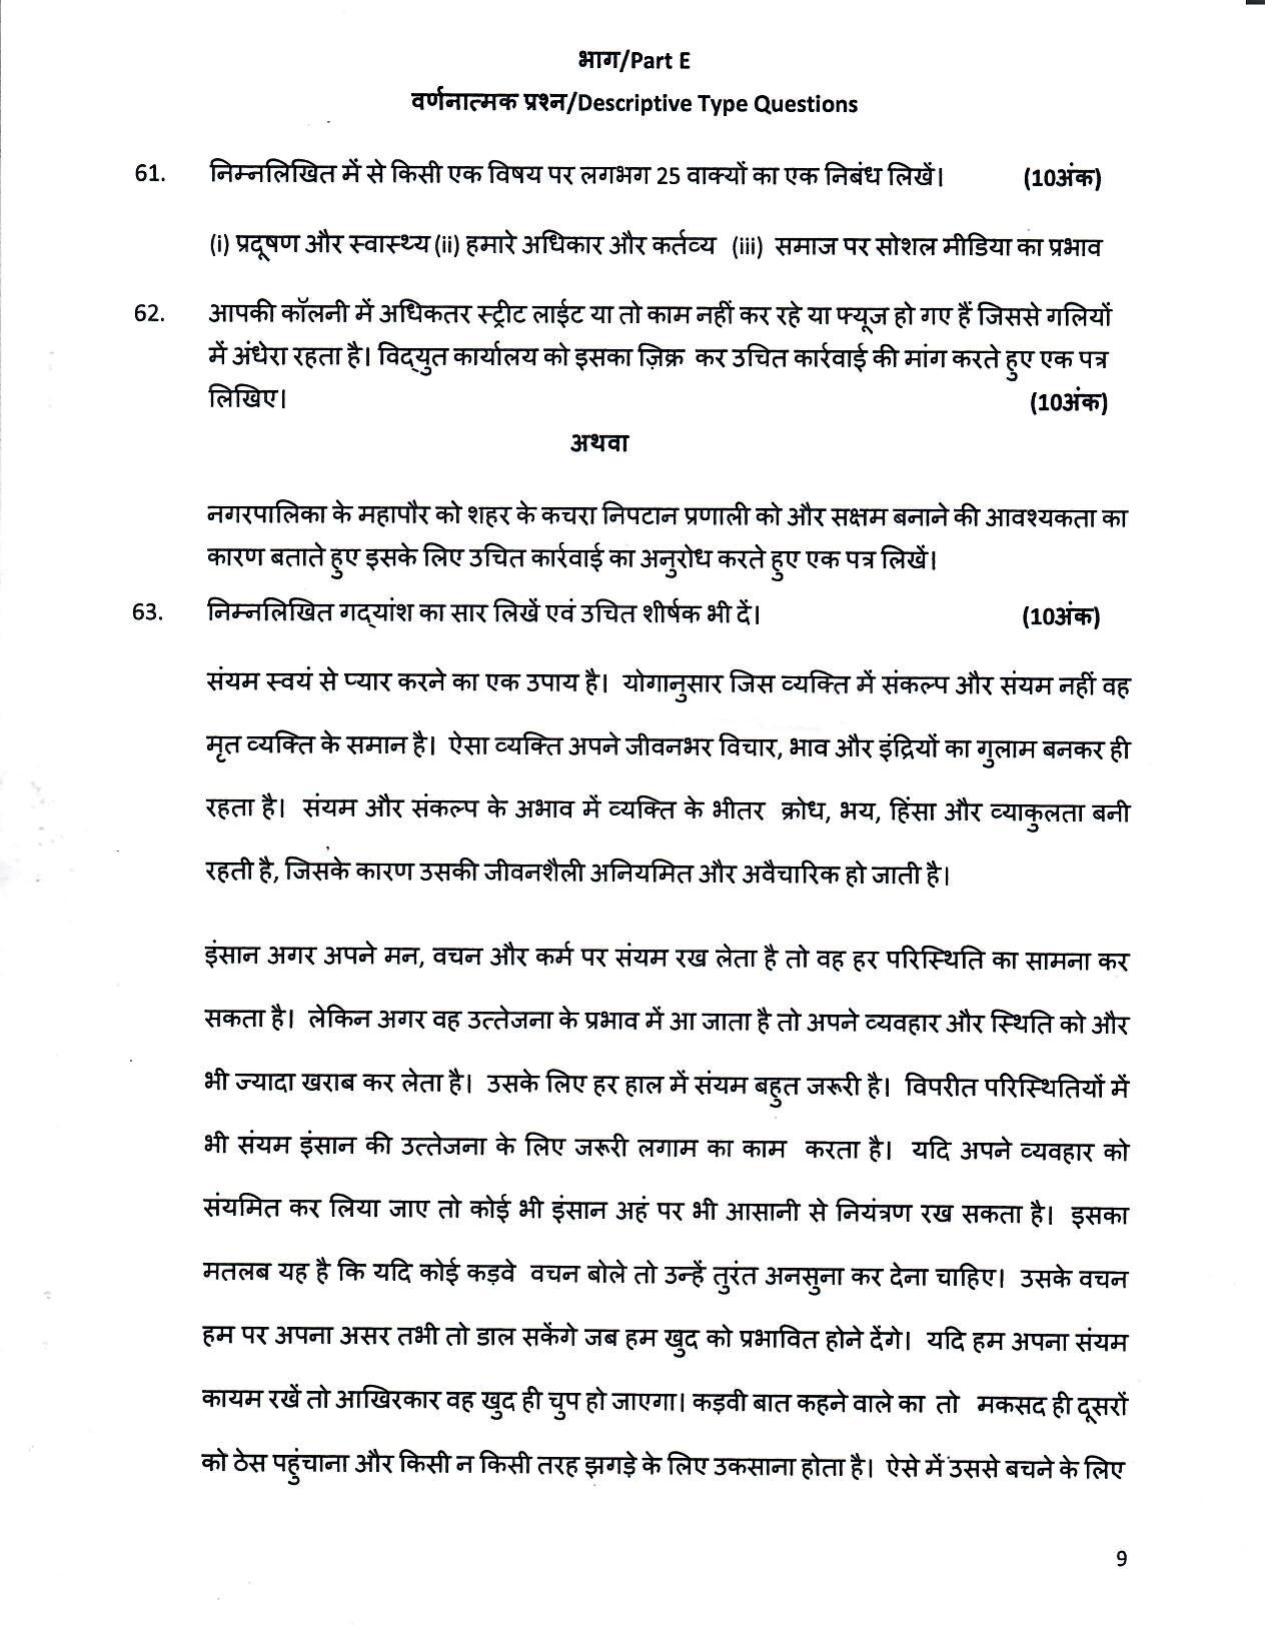 LPSC Hindi Typist 2020 Question Paper - Page 10